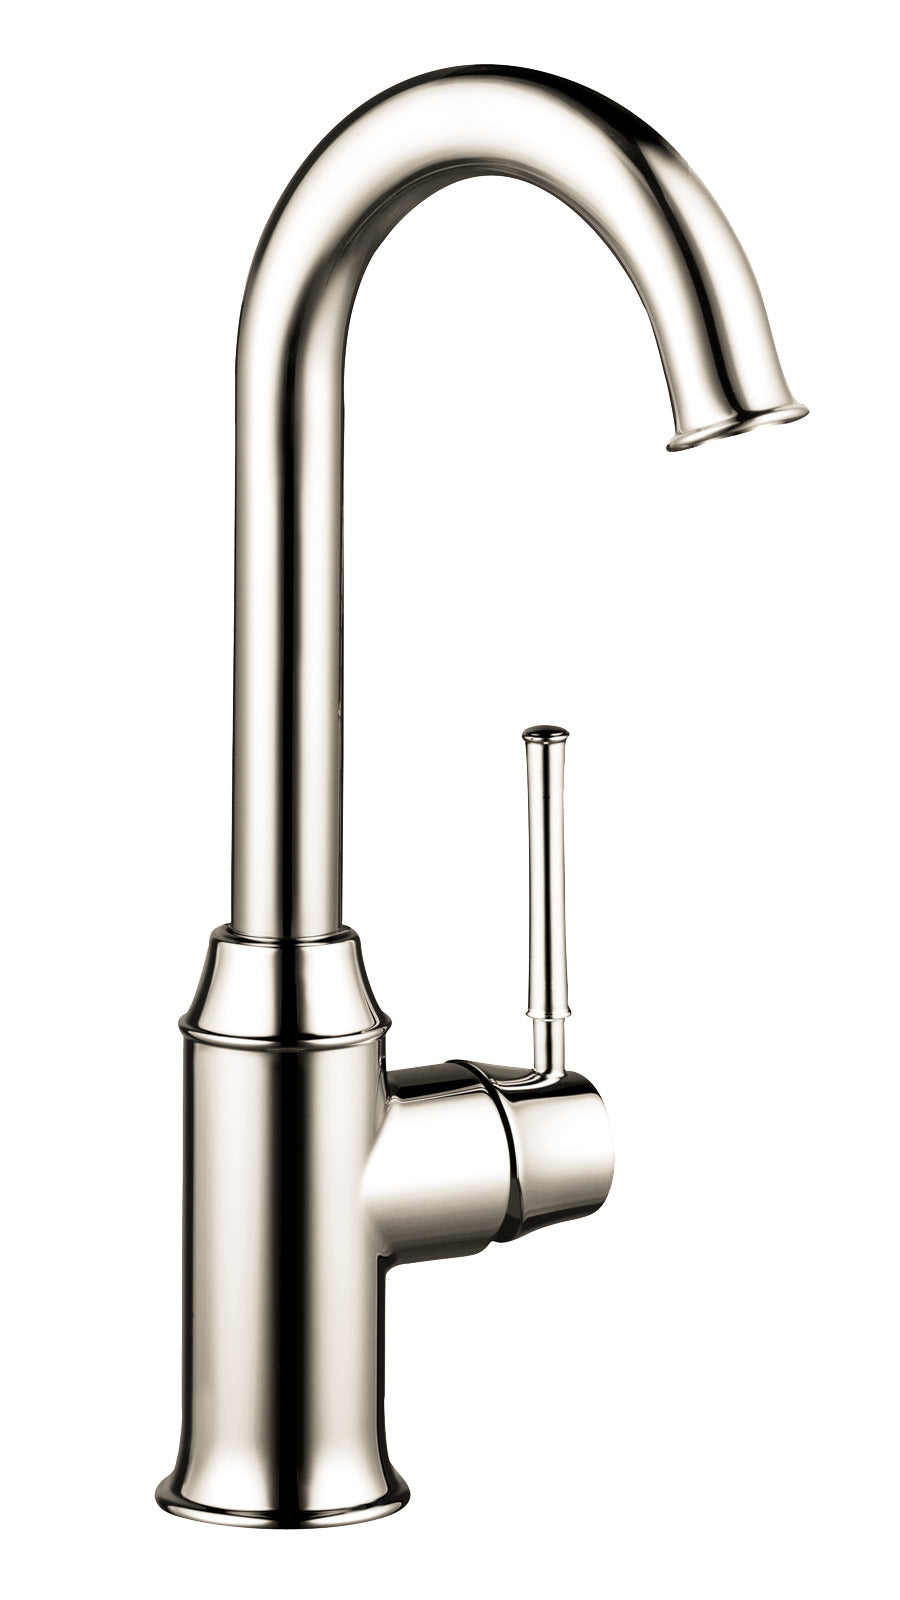 HANSGROHE 04217830 Polished Nickel Talis C Classic Kitchen Faucet 1.5 GPM